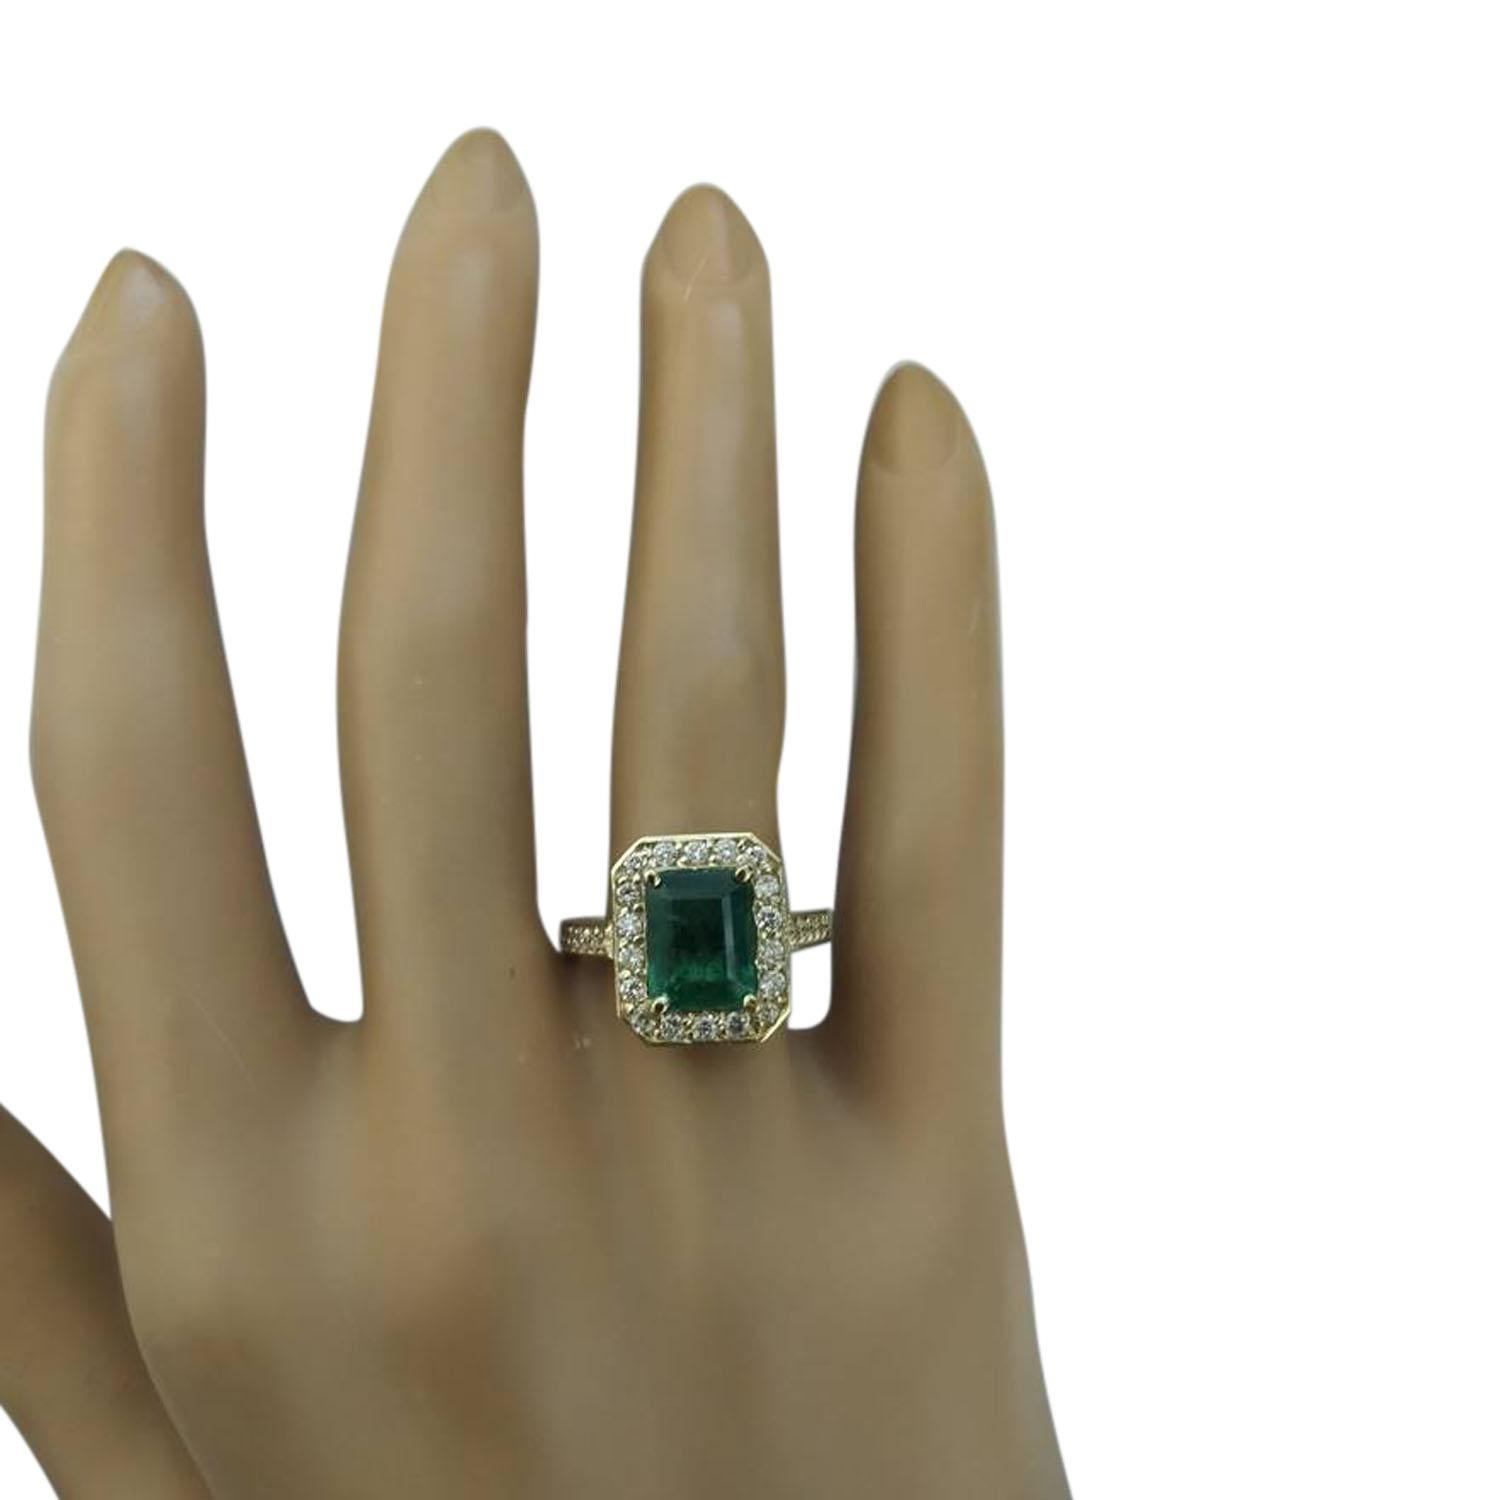 3.40 Carat Natural Emerald 14 Karat Solid Yellow Gold Diamond Ring
Stamped: 14K 
Ring Size 7
Total Ring Weight: 6.2 Grams 
Emerald Weight 2.80 Carat (9.00x7.00 Millimeters)
Natural Emerald Treatment: Oil Only
Diamond Weight: 0.60 Carat (F-G Color,